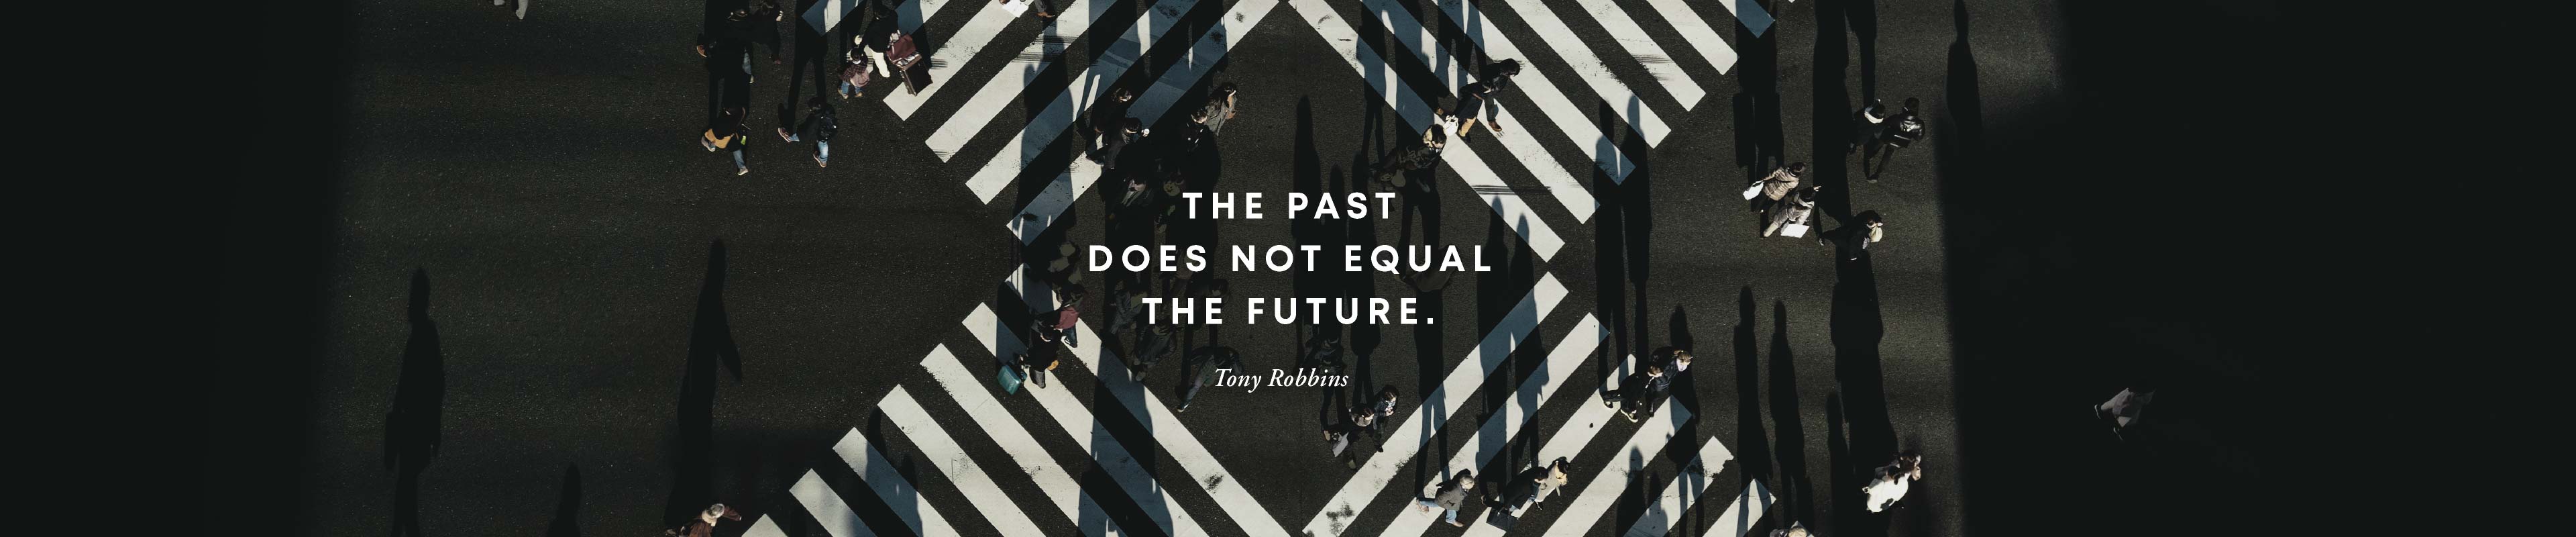 Overhead view of street intersection with quote overlay from Tony Robbins&colon; &ldquo;The past does not equal the future&rdquo;